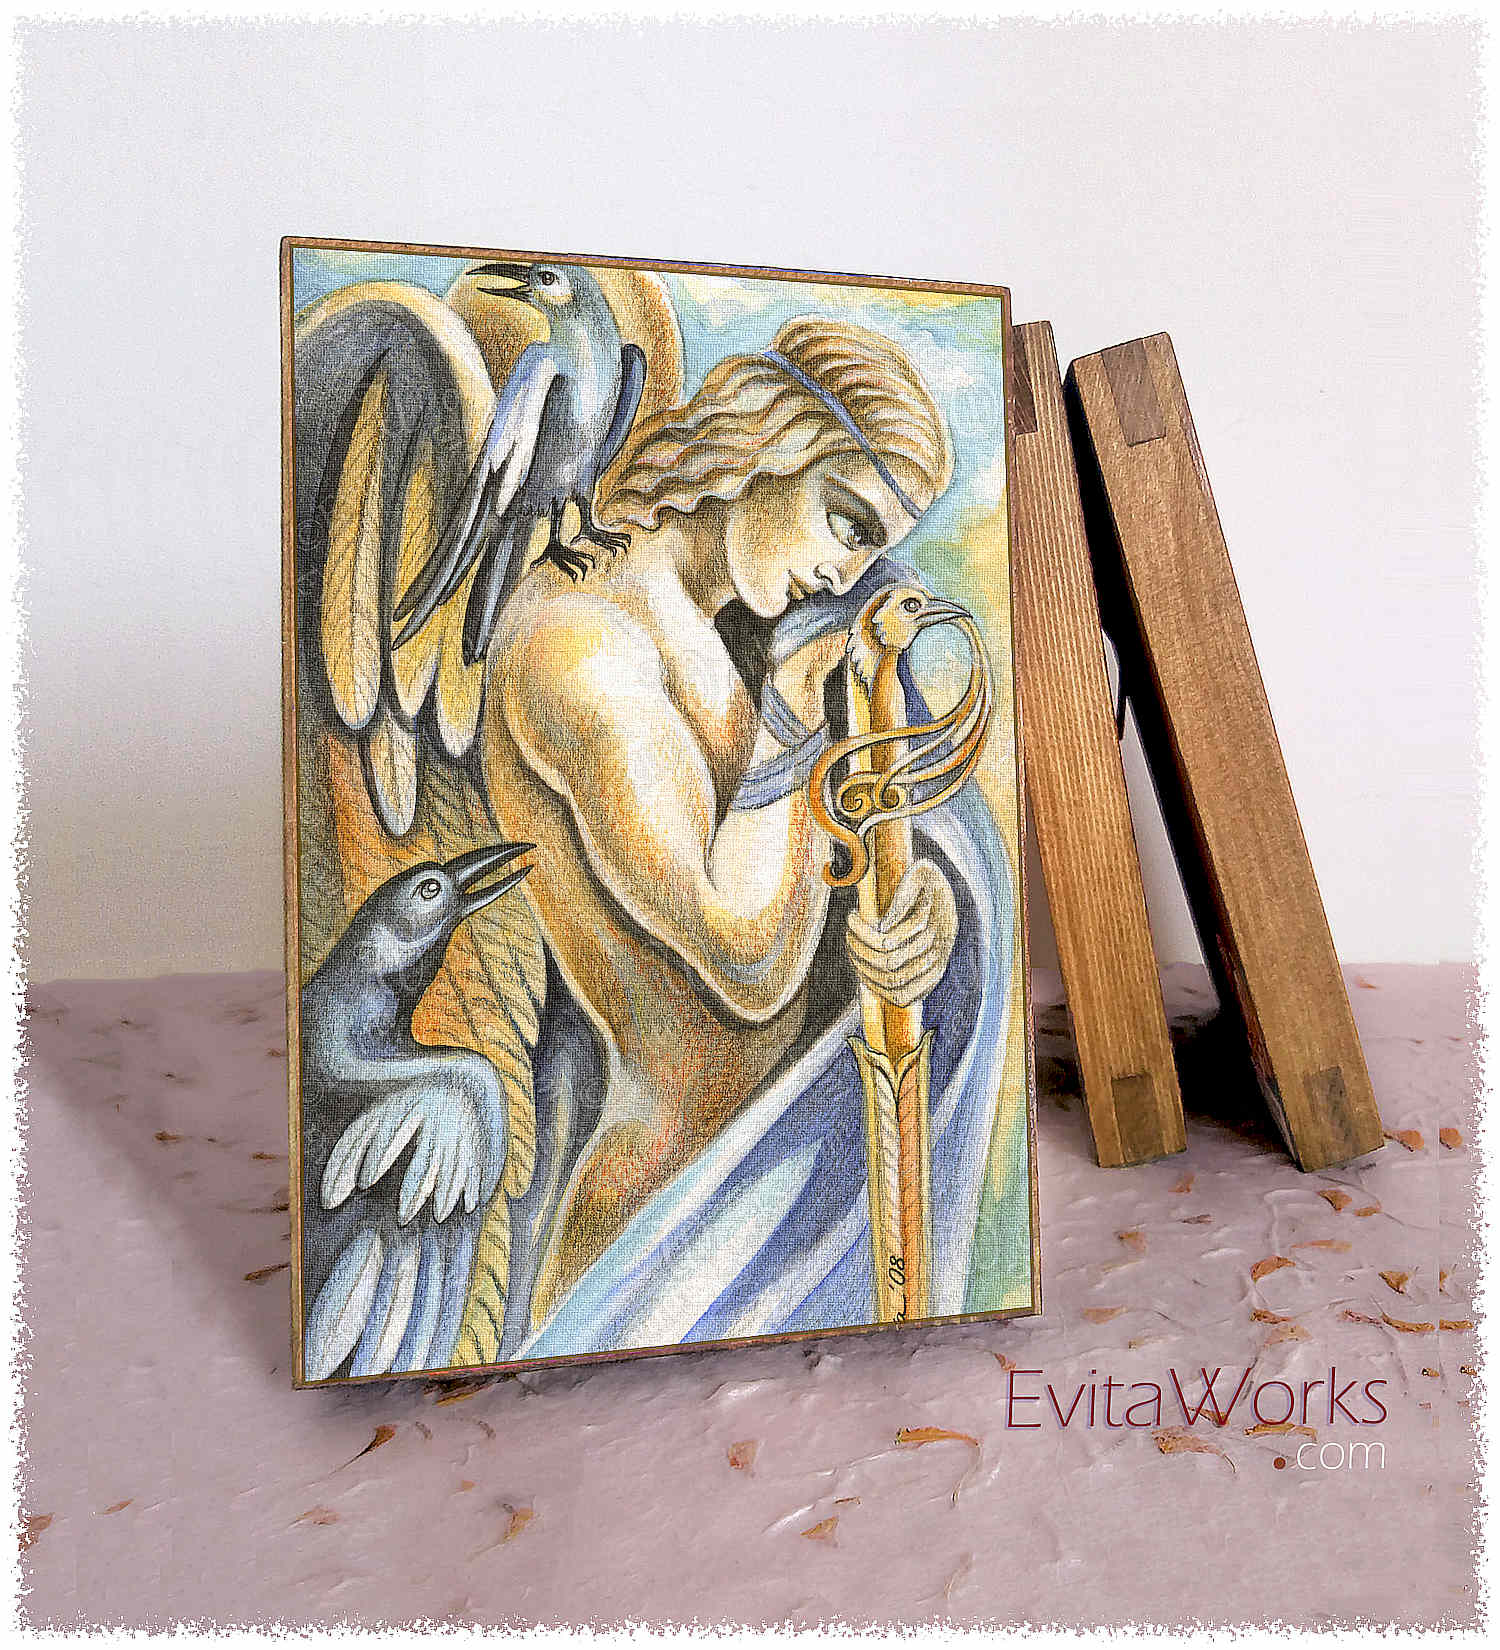 Hit to learn about "Angel 02, mythical man art" on woodblocks